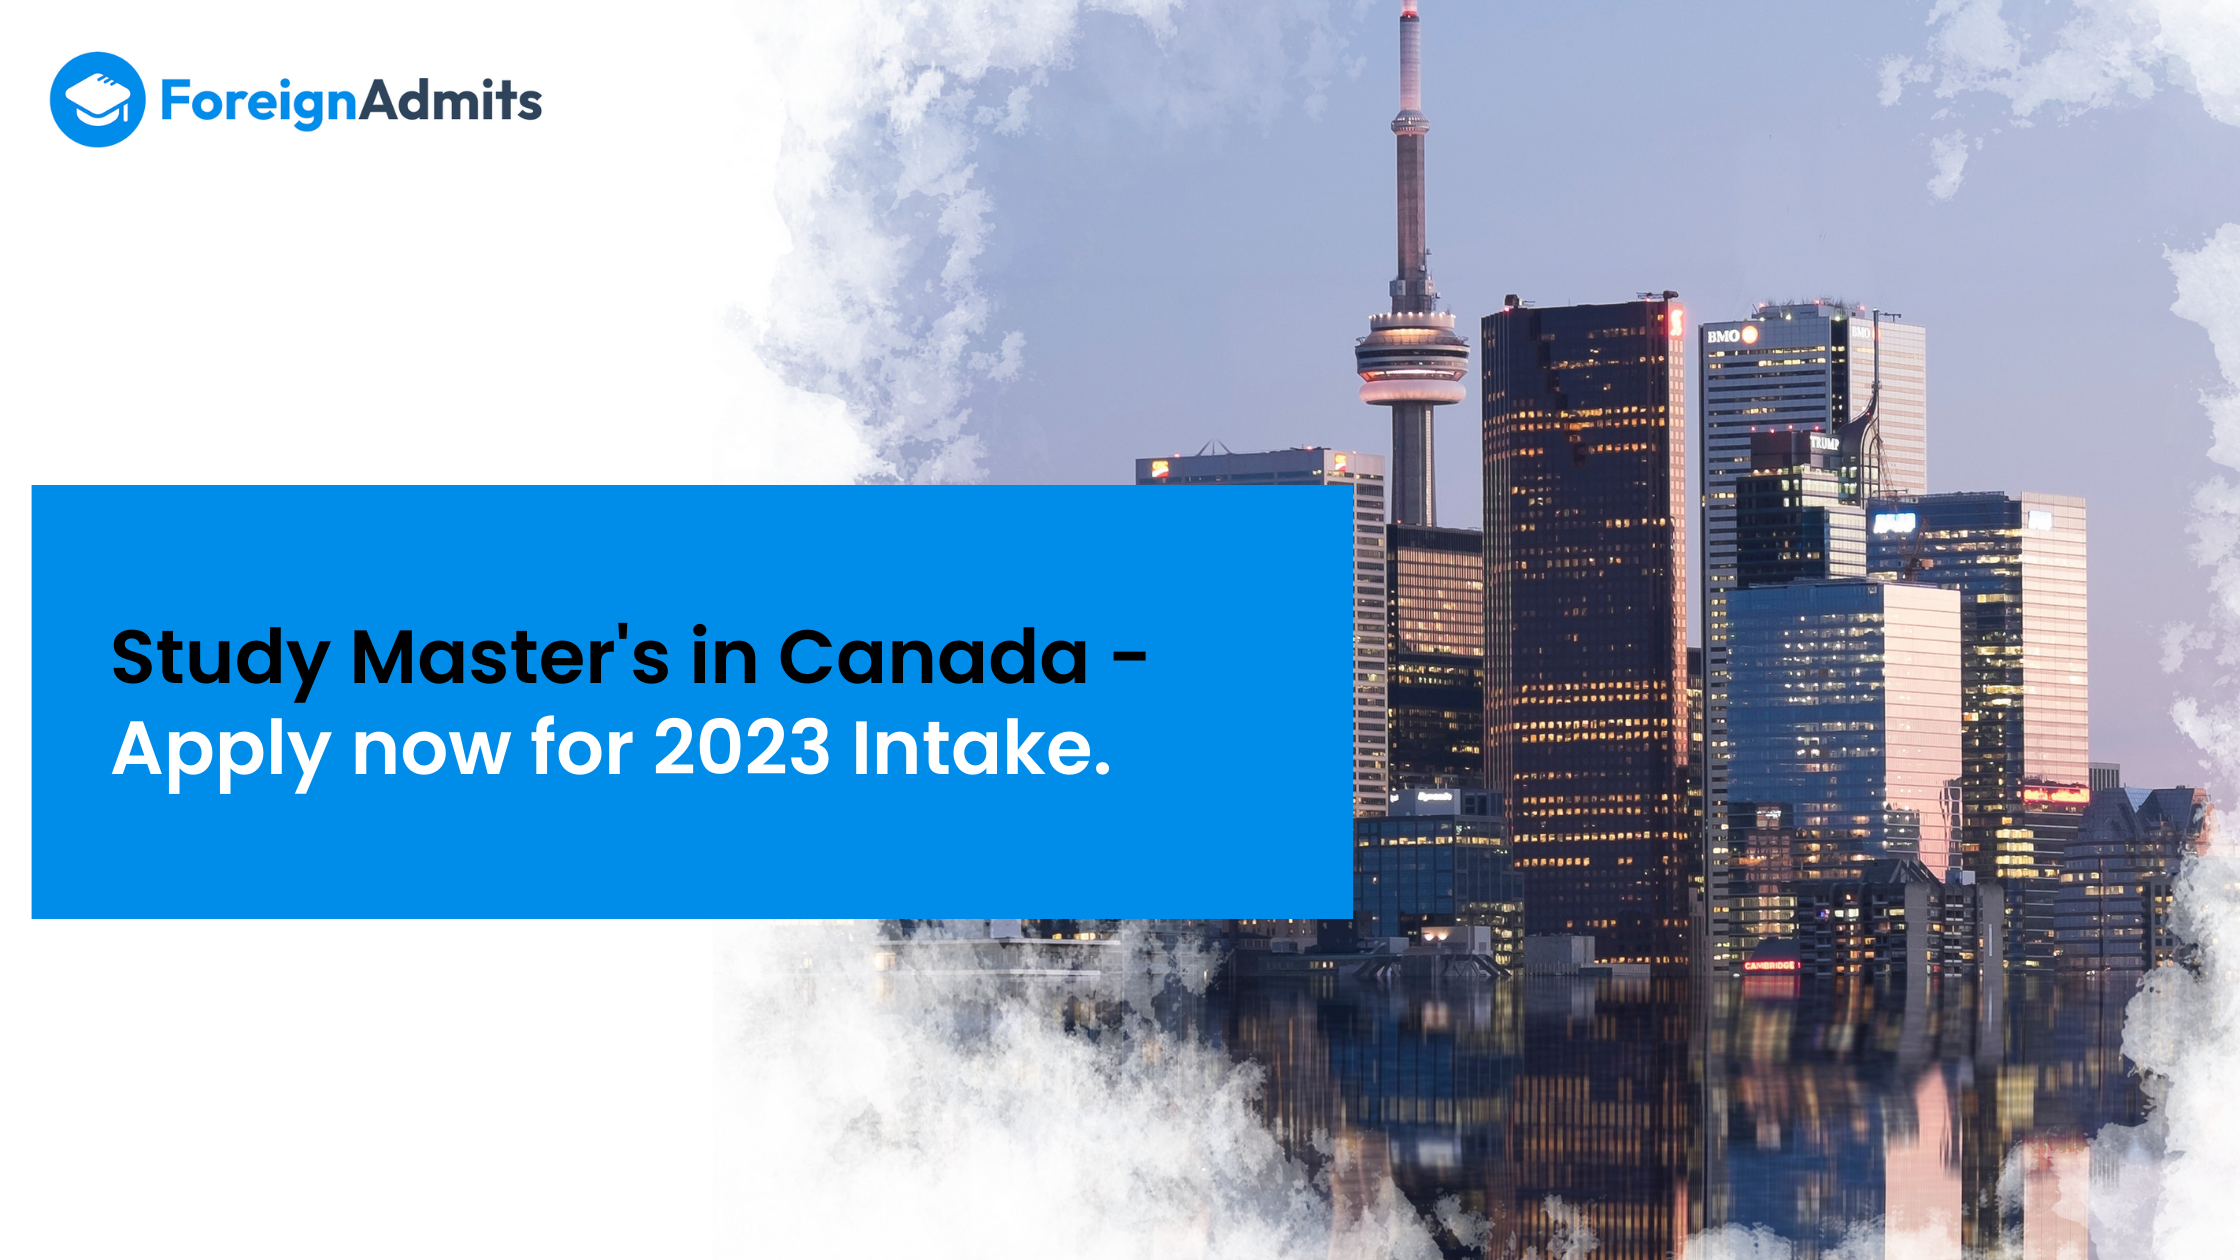 Requirement for Masters in Canada – Apply now for 2023 Intake